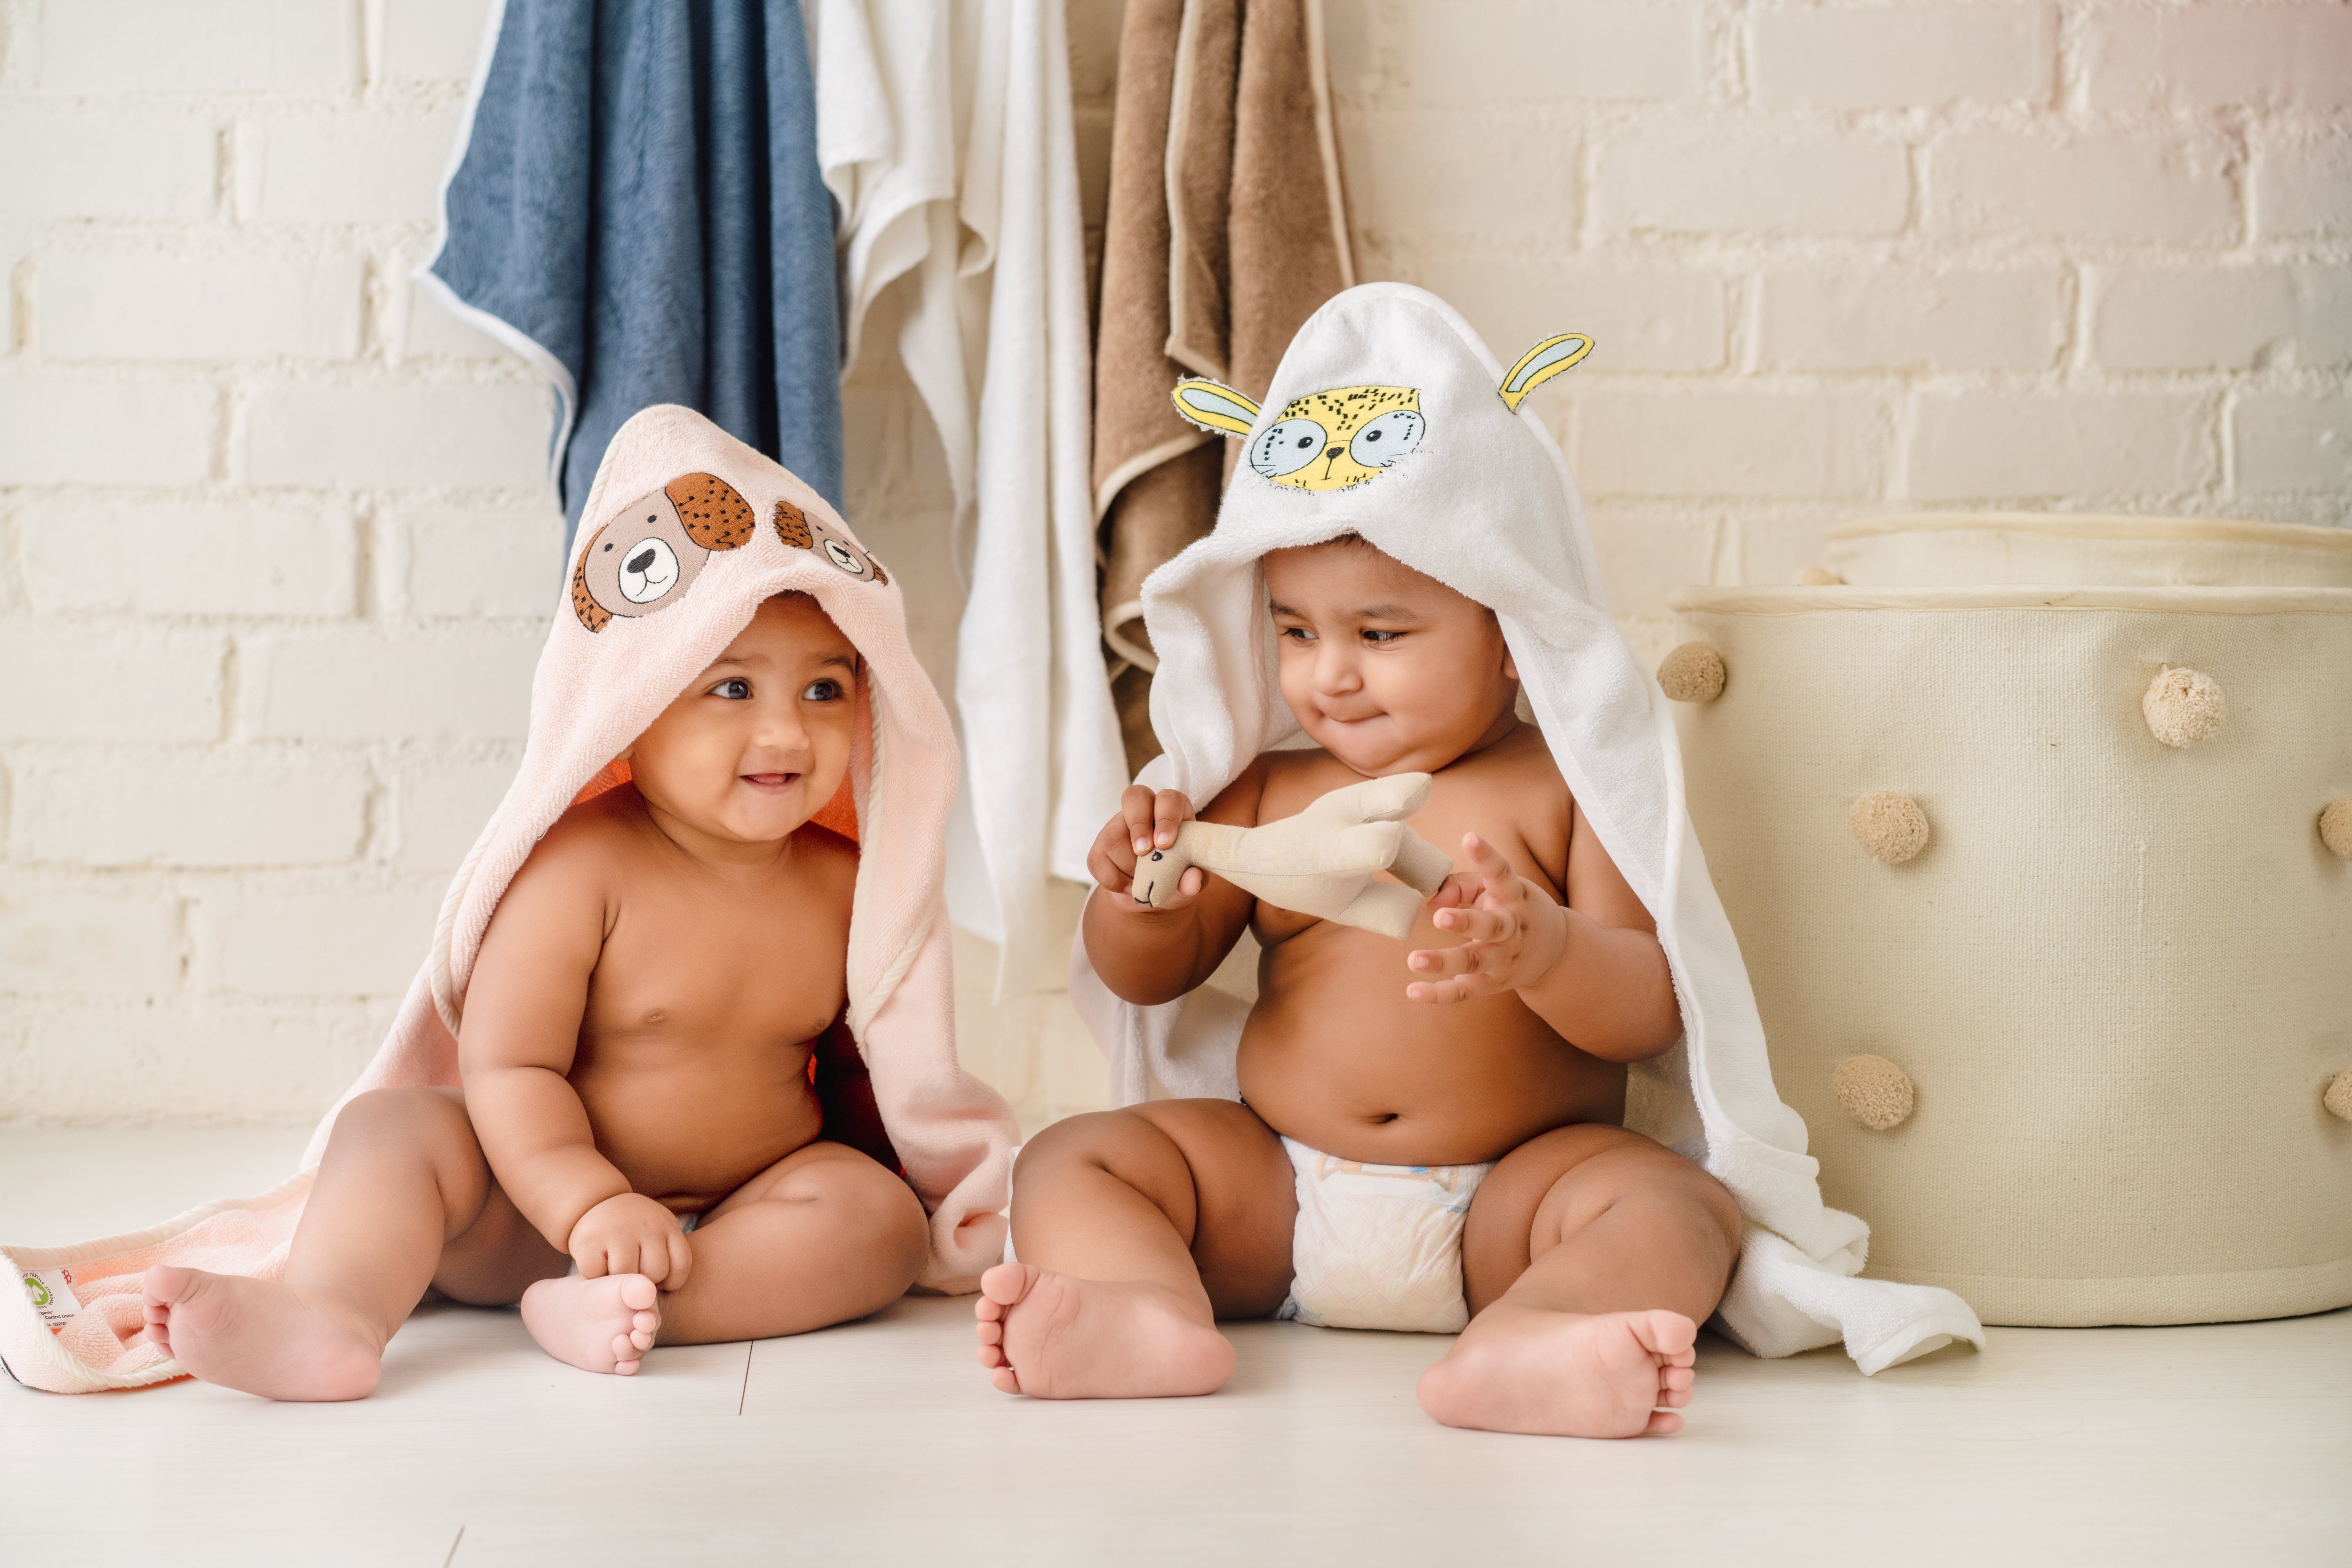 Bubbles and More | Creating a Safe and Serene Bath Time Experience